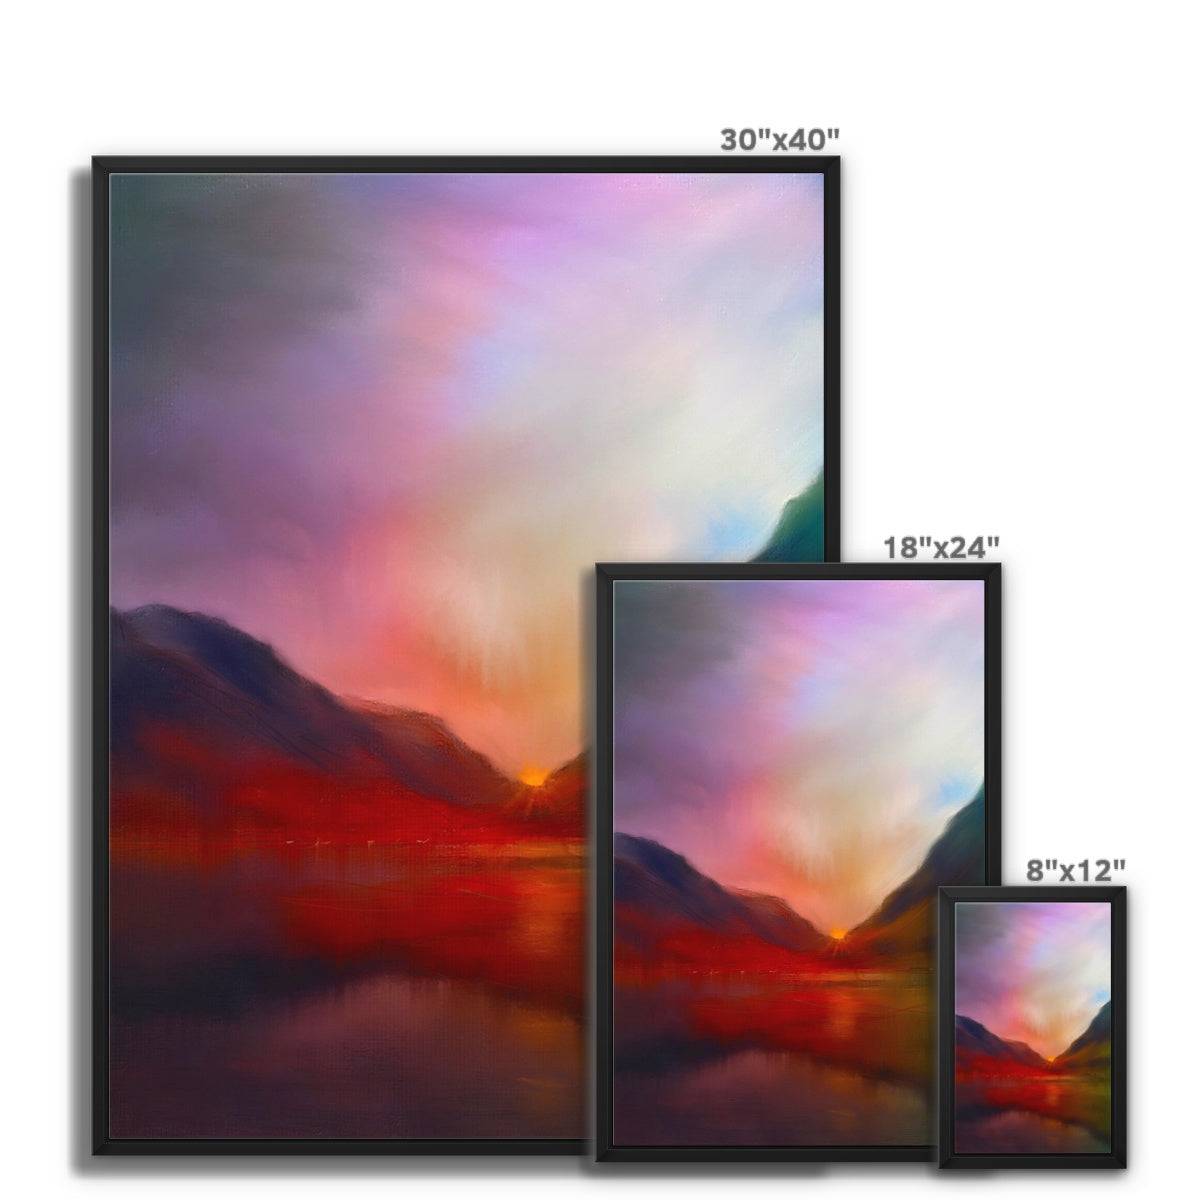 Glencoe Sunset Painting | Framed Canvas From Scotland-Floating Framed Canvas Prints-Glencoe Art Gallery-Paintings, Prints, Homeware, Art Gifts From Scotland By Scottish Artist Kevin Hunter